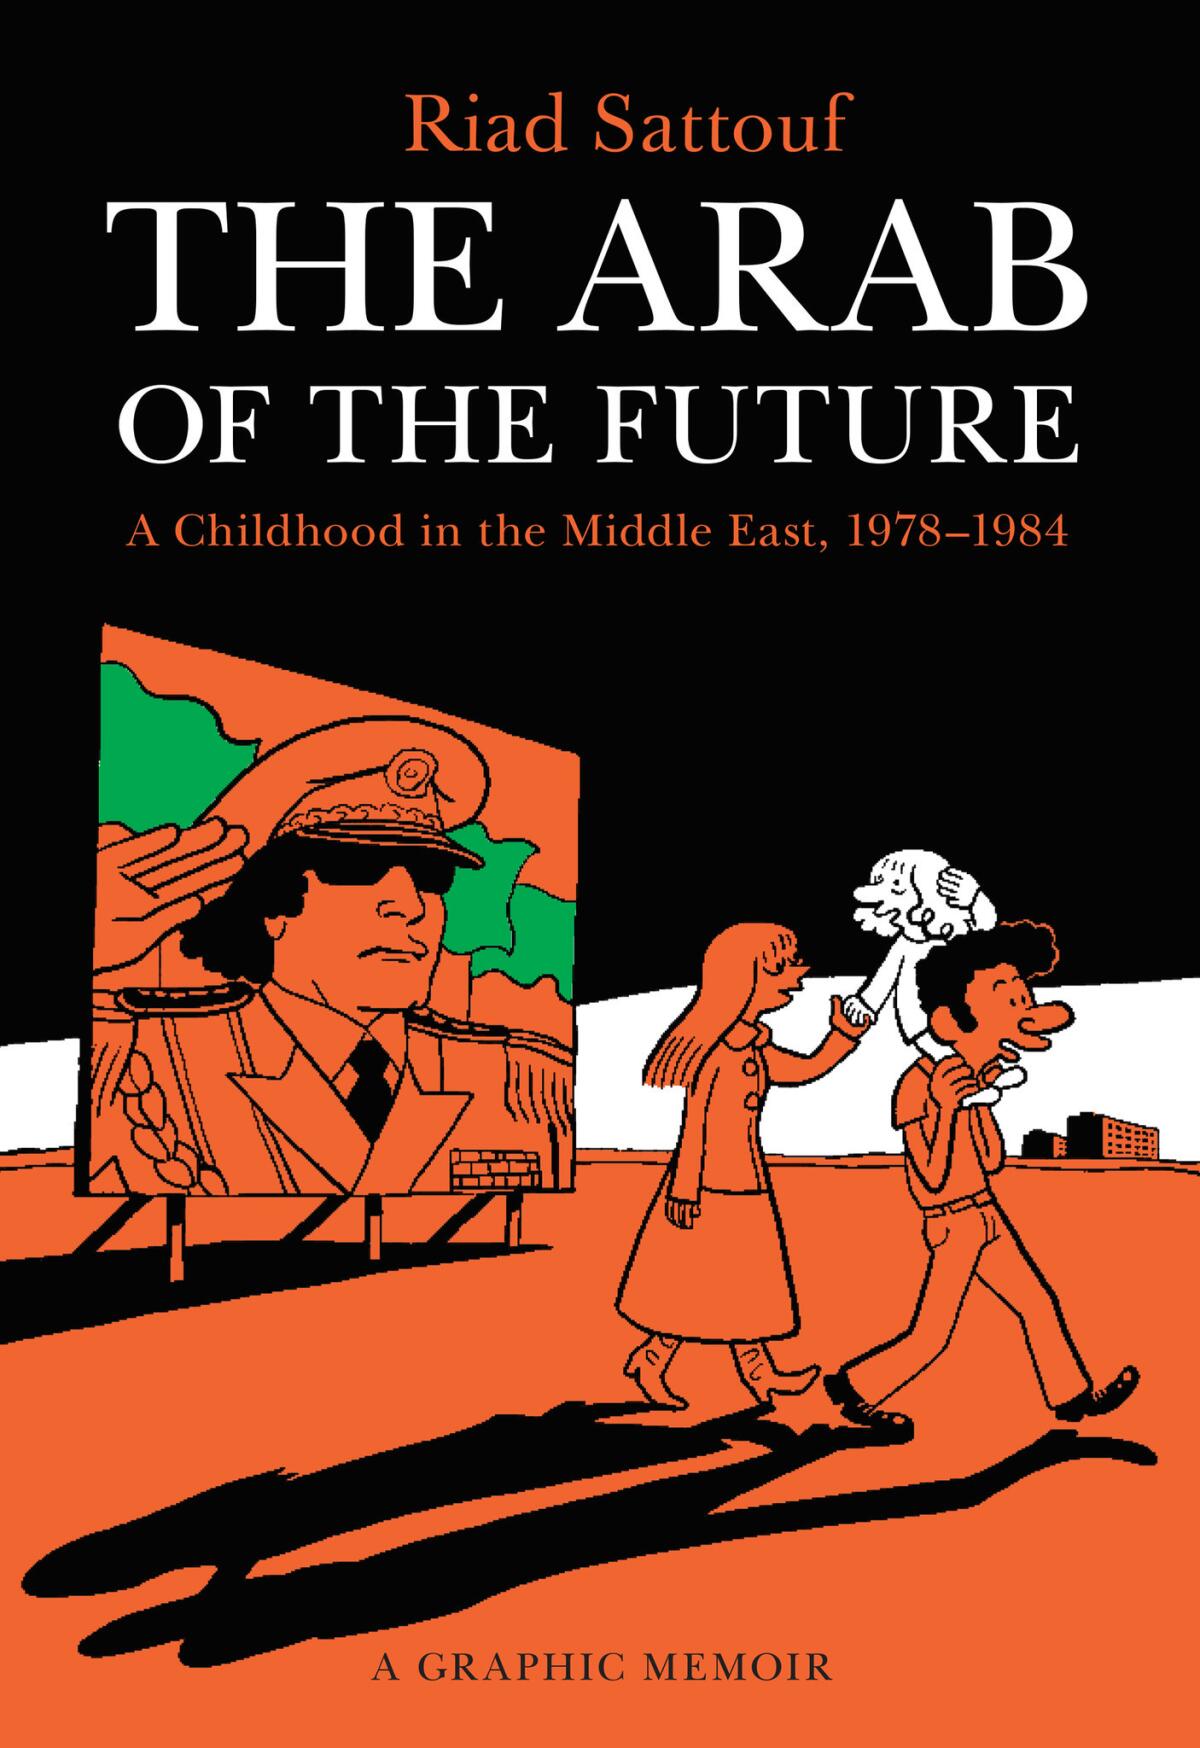 The Arab of the Future by